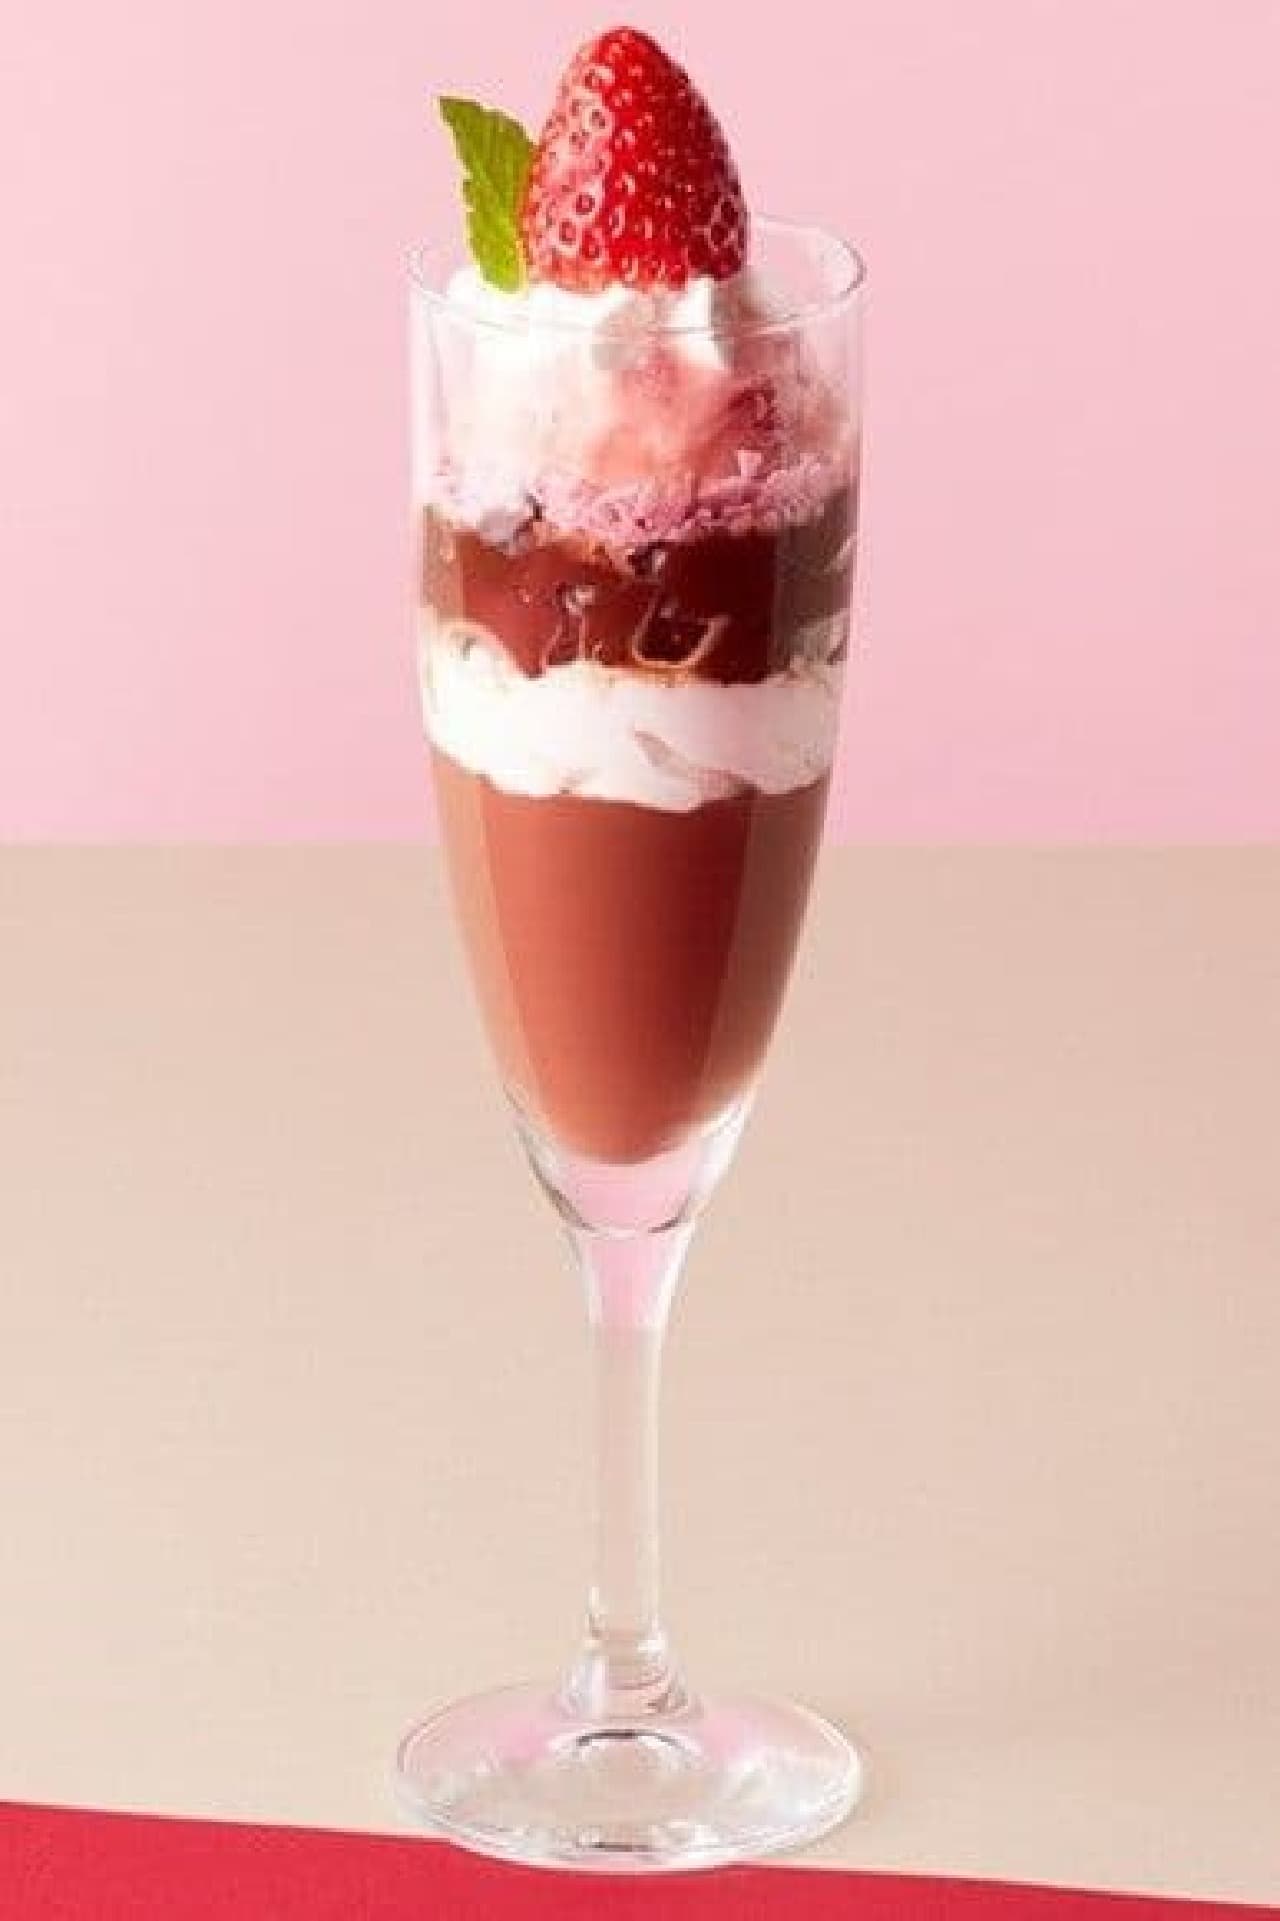 Coco's "Strawberry and Chocolate Glass Parfait"